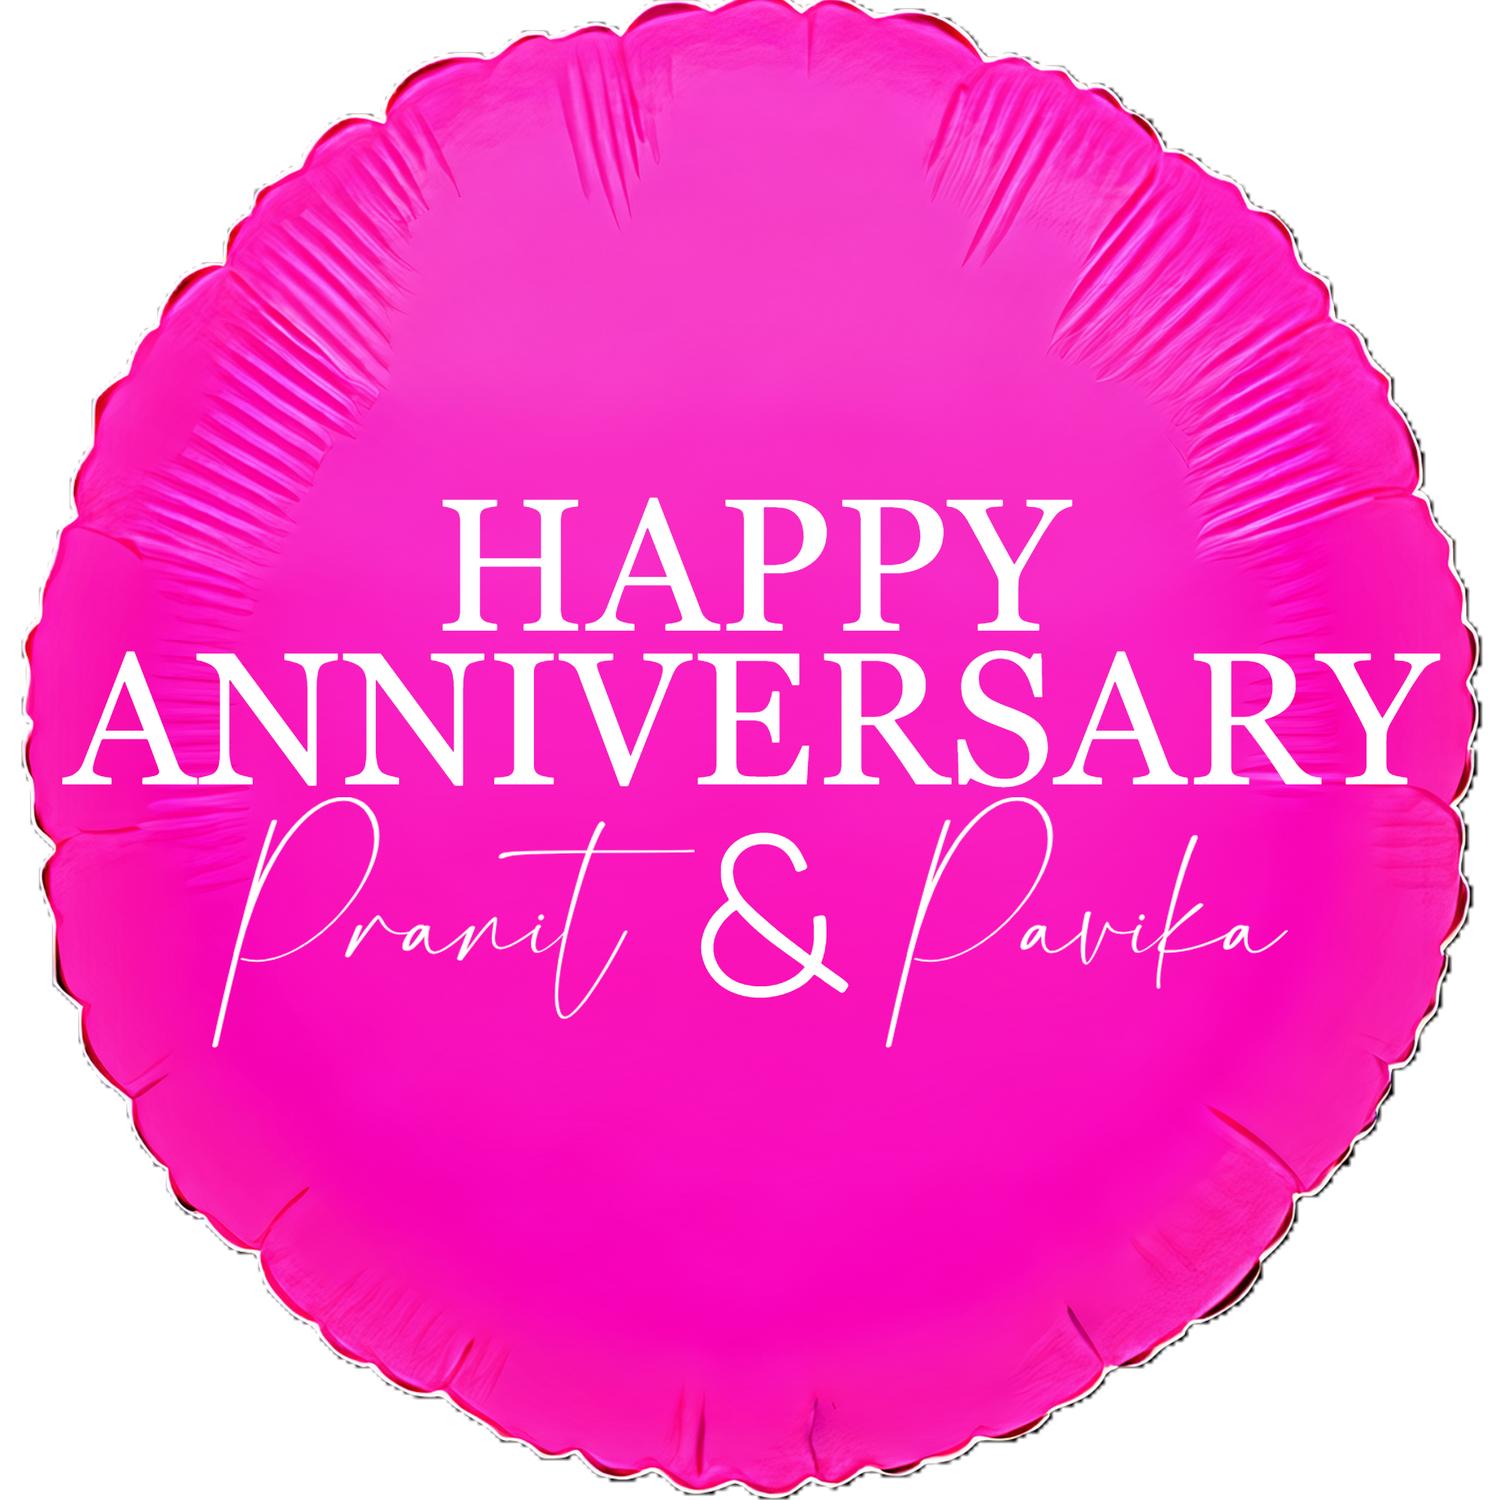 Custom Name/Text/Message Pink Round Balloons For First Wedding Anniversary, 2nd/3rd/5th/10th/15th/20th/25th/30th/35th/40th/45th/50th/55th/60th/65th/75th Marriage Anniversary And Wedding Milestones. Supports Helium/Air, Luxury Bespoke Balloons Make Perfect Decoration Supplies & Surprise For Your Husband/Wife/Partner/Other-Half.